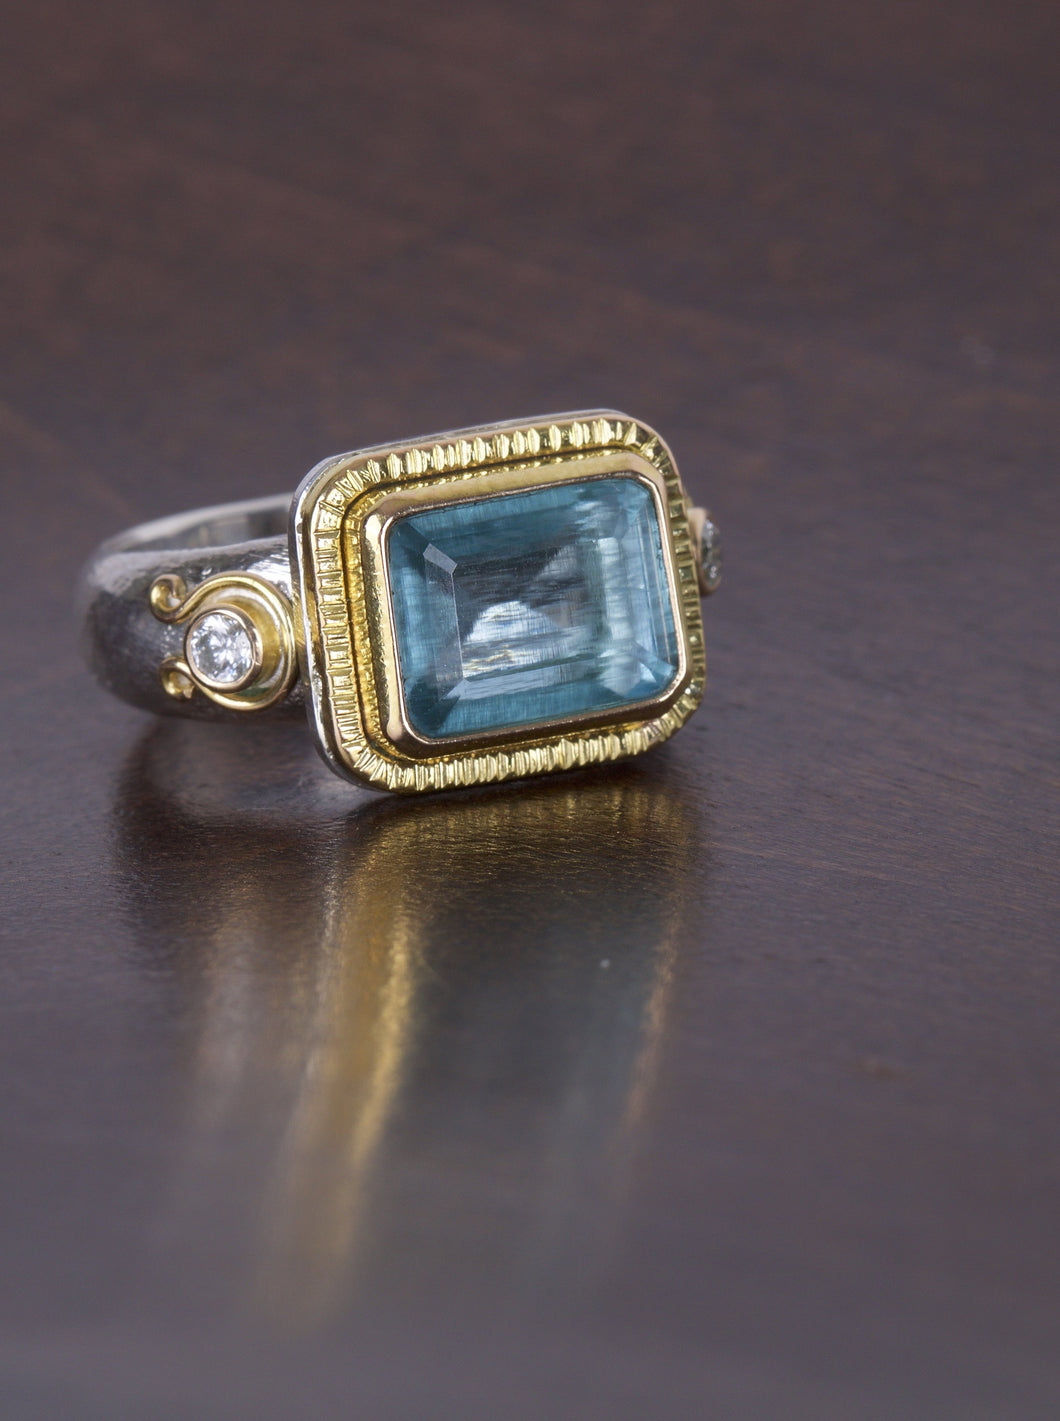 Aquamarine and Gold Ring 05518 - Ormachea Jewelry